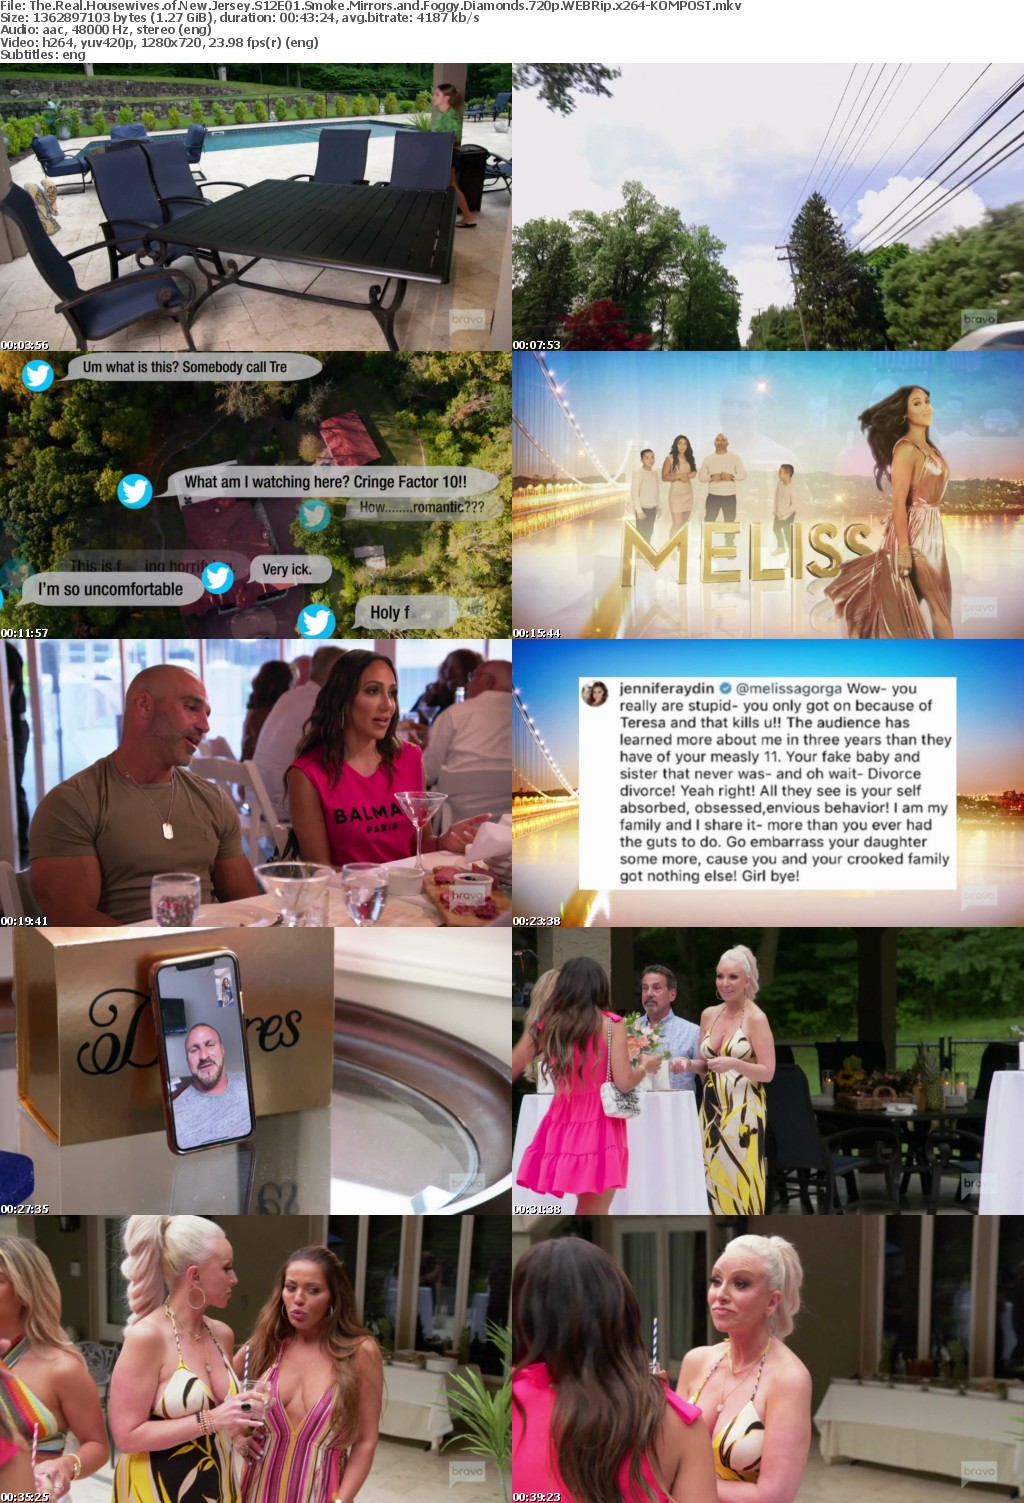 The Real Housewives of New Jersey S12E01 Smoke Mirrors and Foggy Diamonds 720p WEBRip x264-KOMPOST